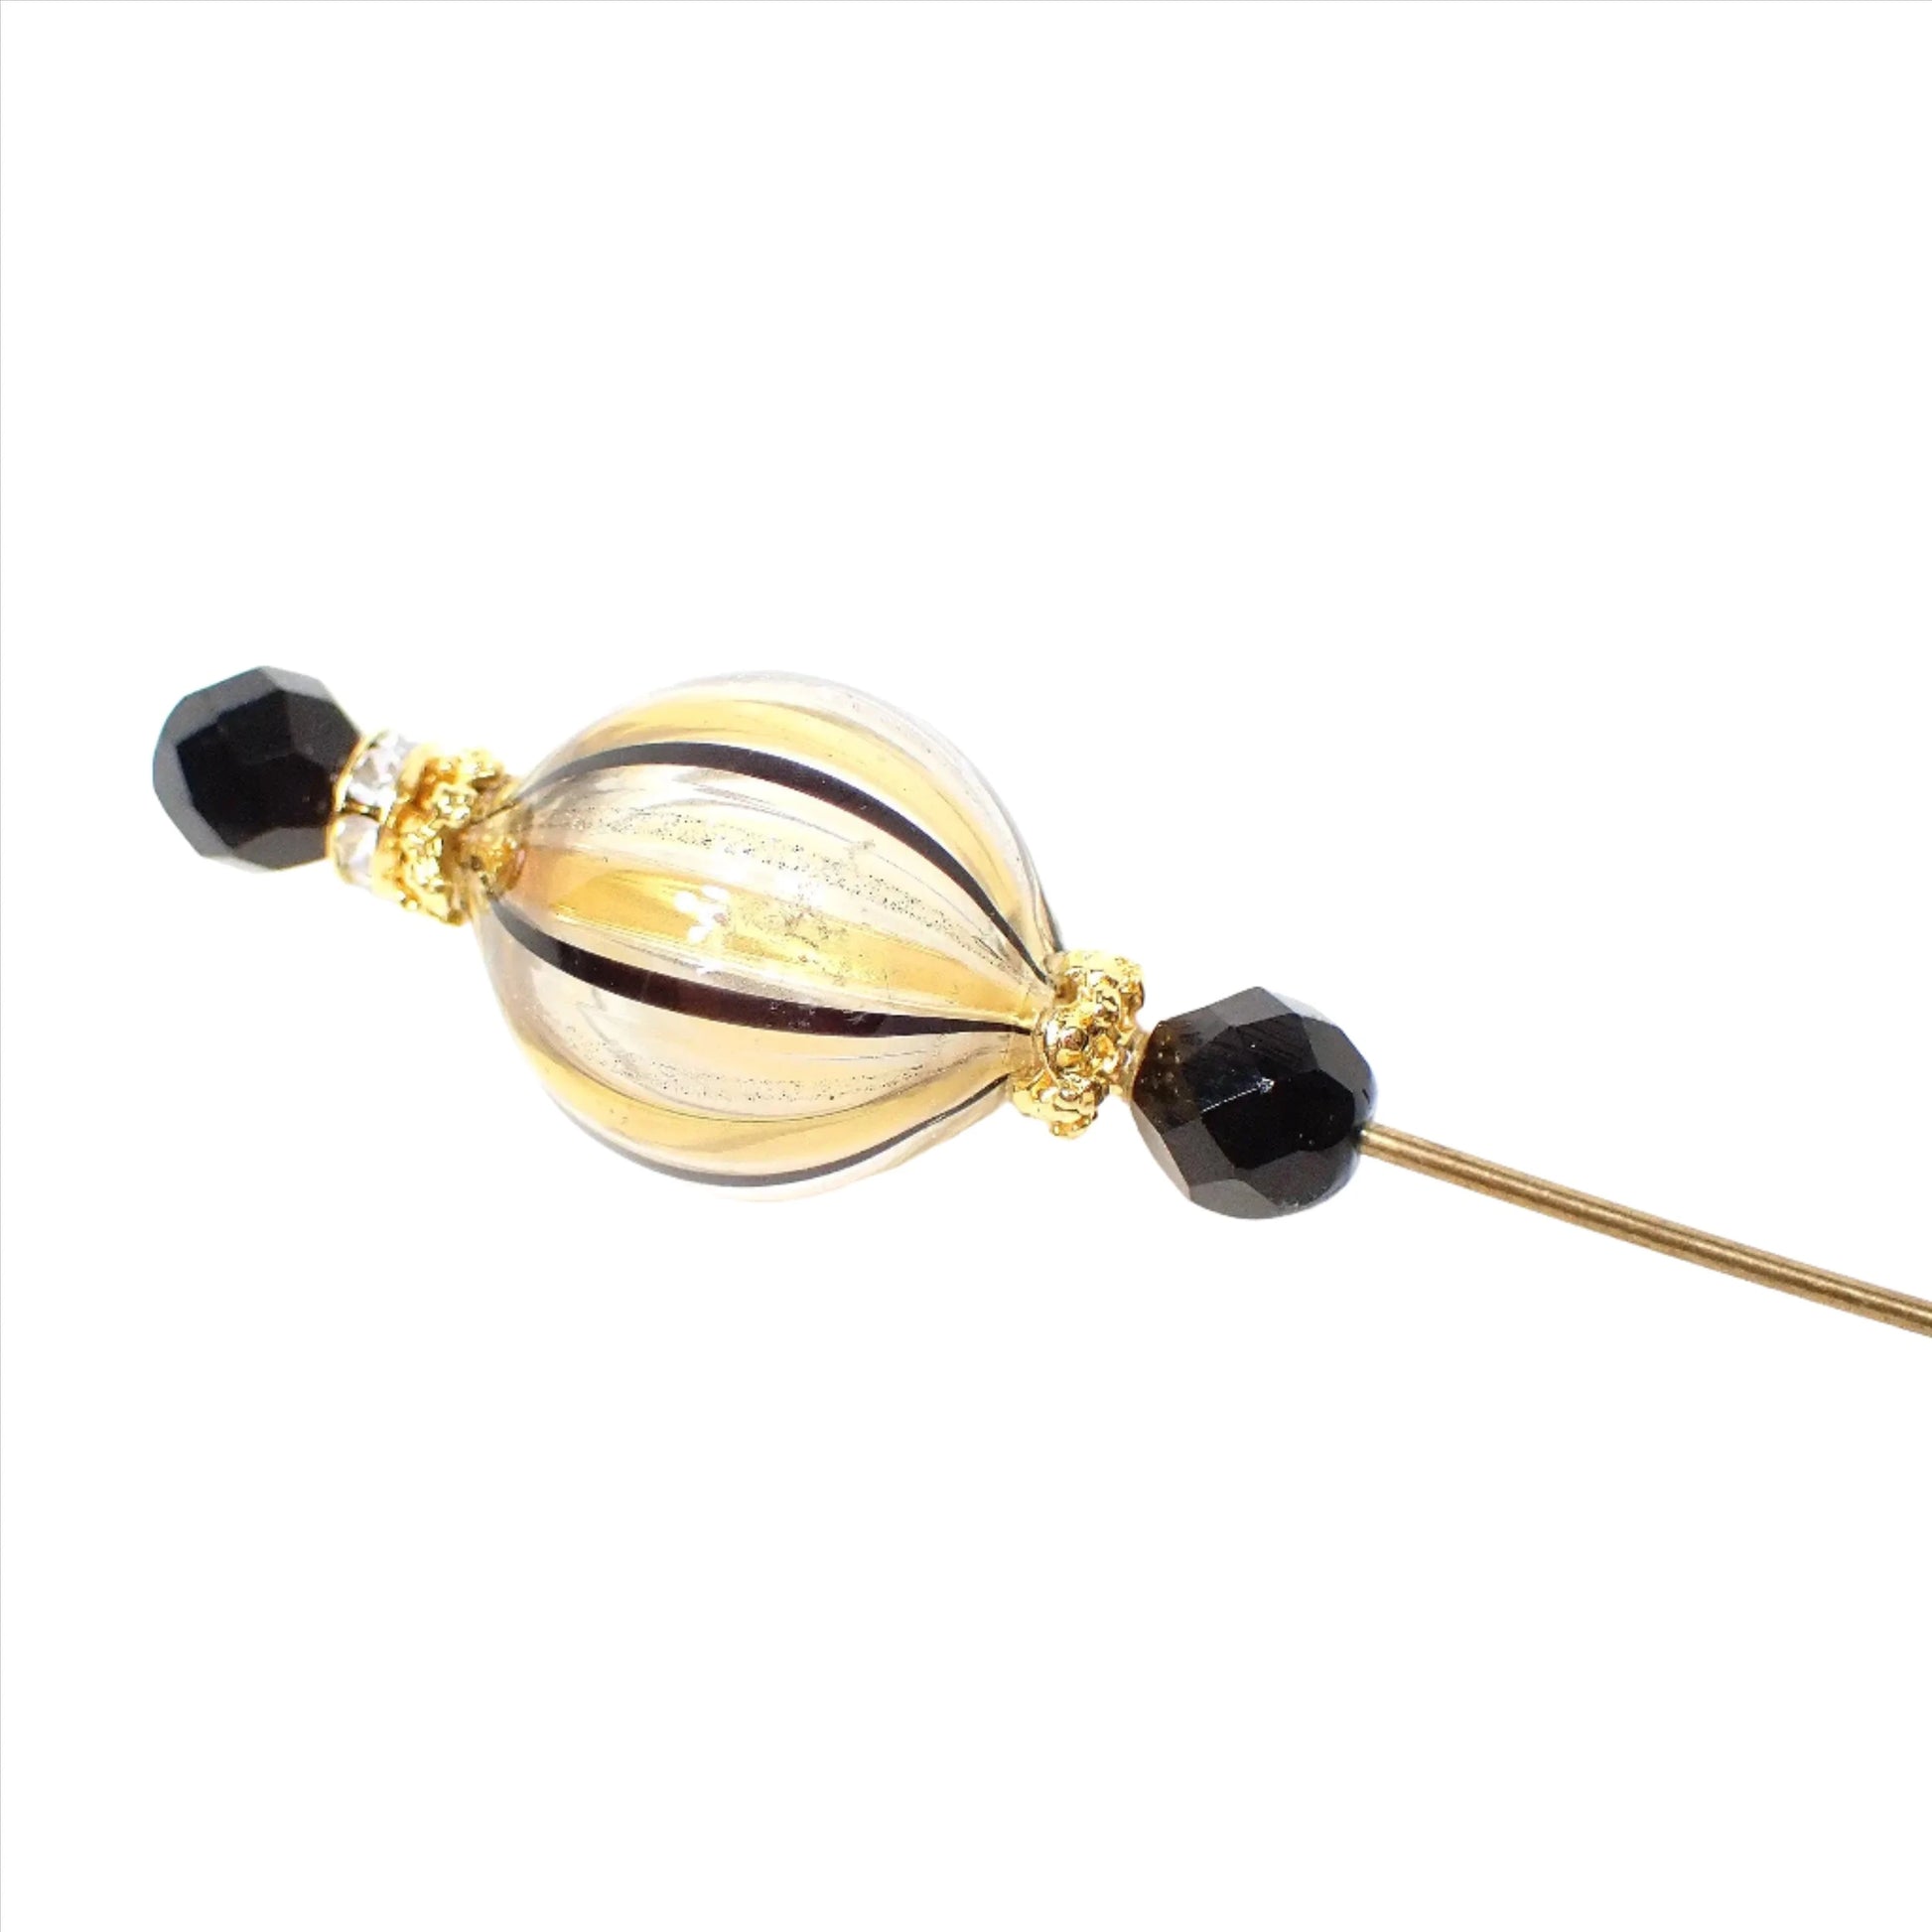 Enlarged top view of the Mid Century vintage hat pin with Murano Glass top. The metal is gold tone plated in color. There is a round hollow Murano glass ball at the top that has black and gold color stripes with fine metallic glitter in between. There is a faceted black bead and rhinestone bead on top of the Murano glass and another faceted black glass bead below it. There is a slide on pin clutch at the bottom.